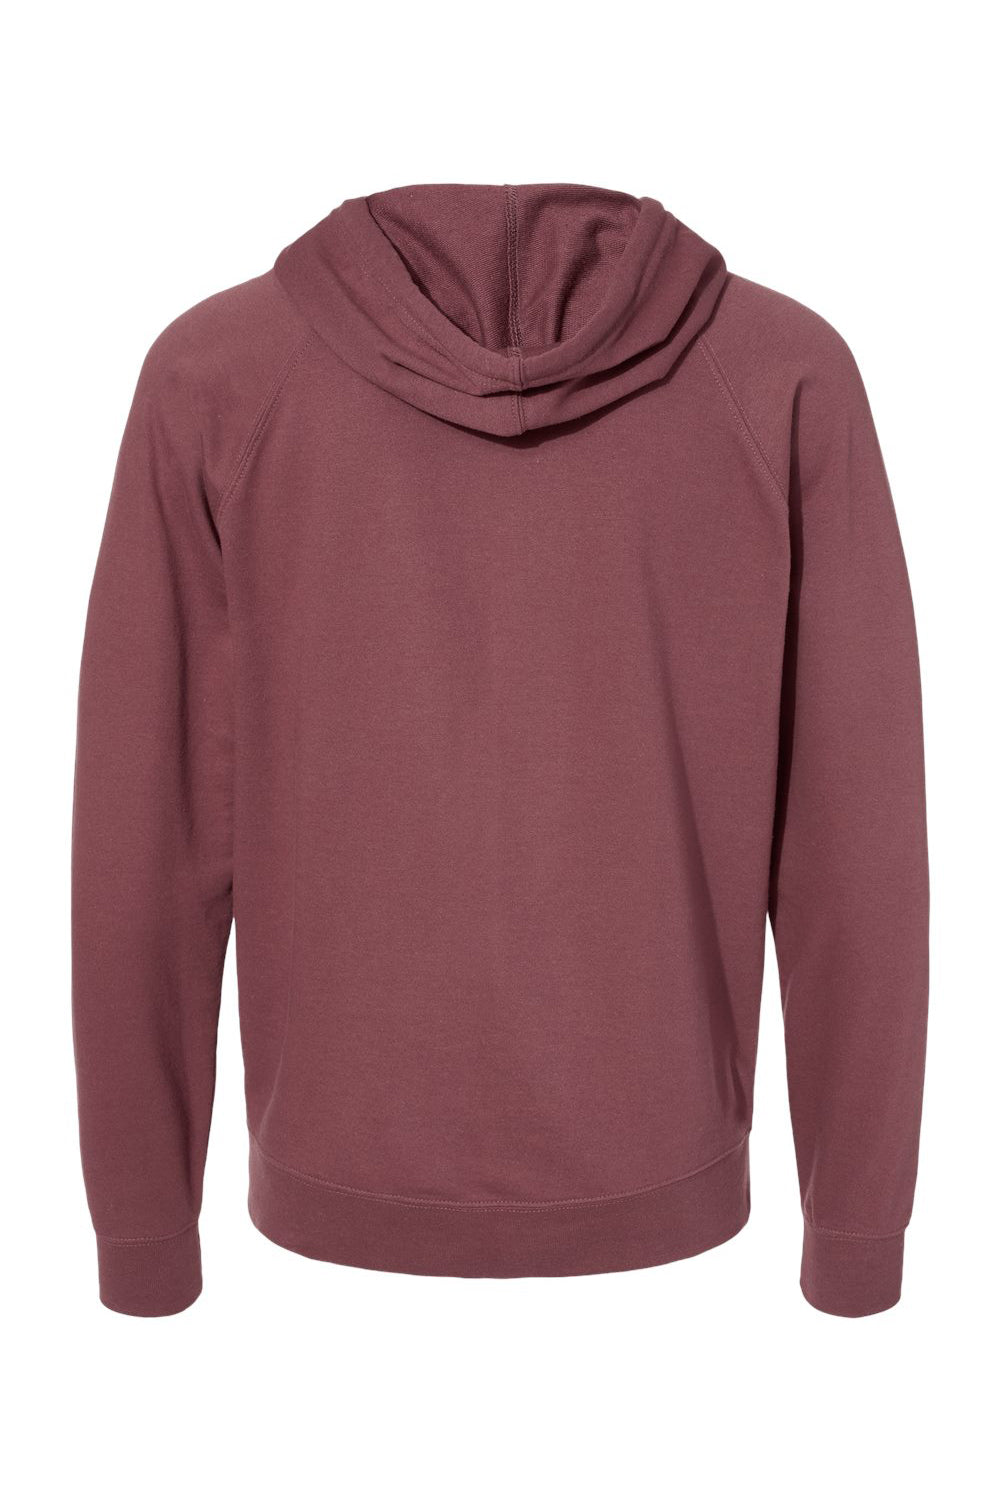 Independent Trading Co. SS1000Z Mens Icon Loopback Terry Full Zip Hooded Sweatshirt Hoodie Port Flat Back